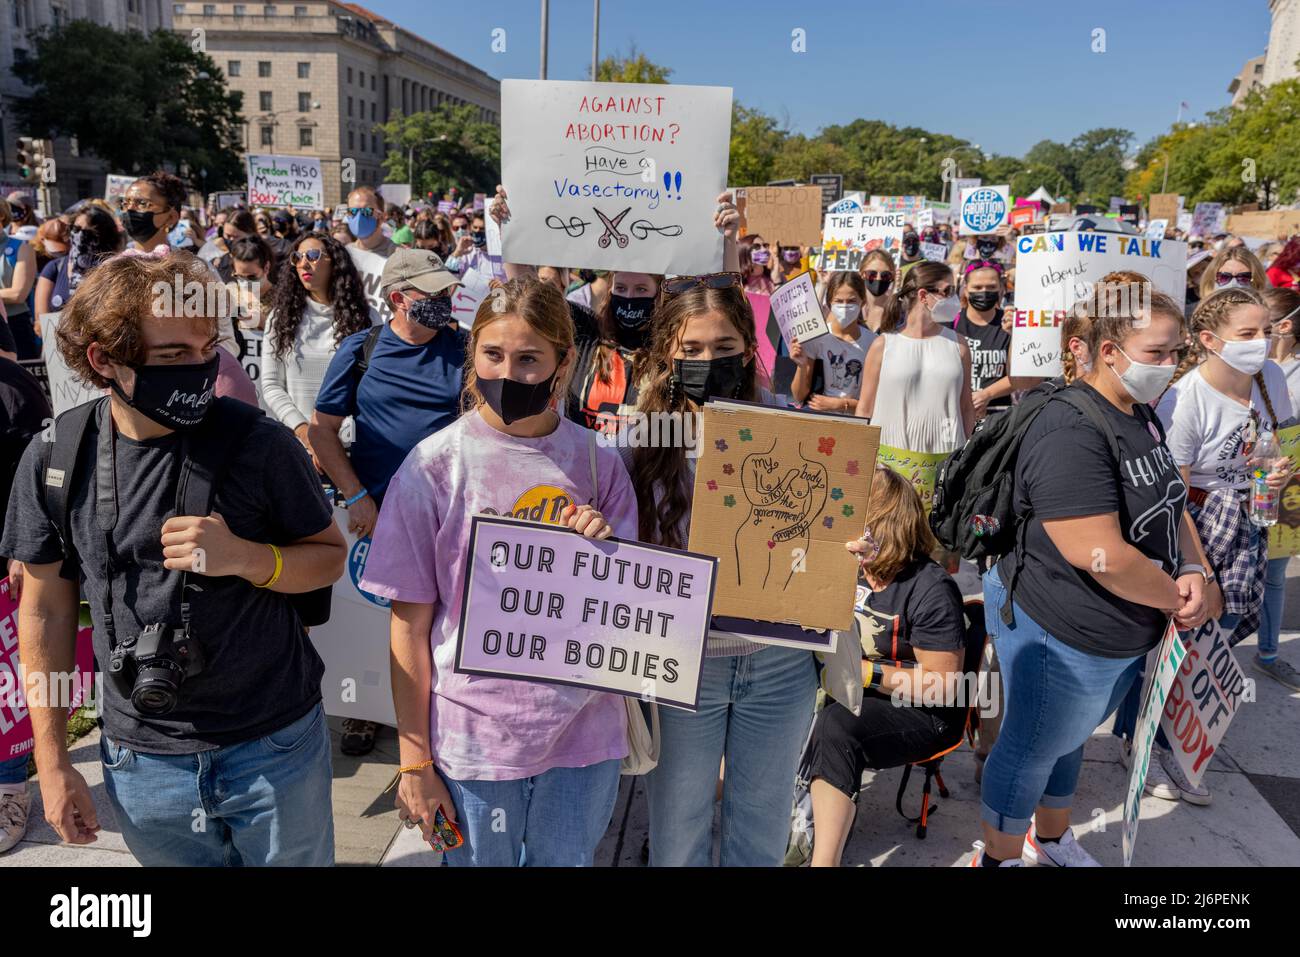 WASHINGTON, D.C. – October 2, 2021: Demonstrators rally in Washington, D.C.’s Freedom Plaza during the 2021 Women’s March. Stock Photo